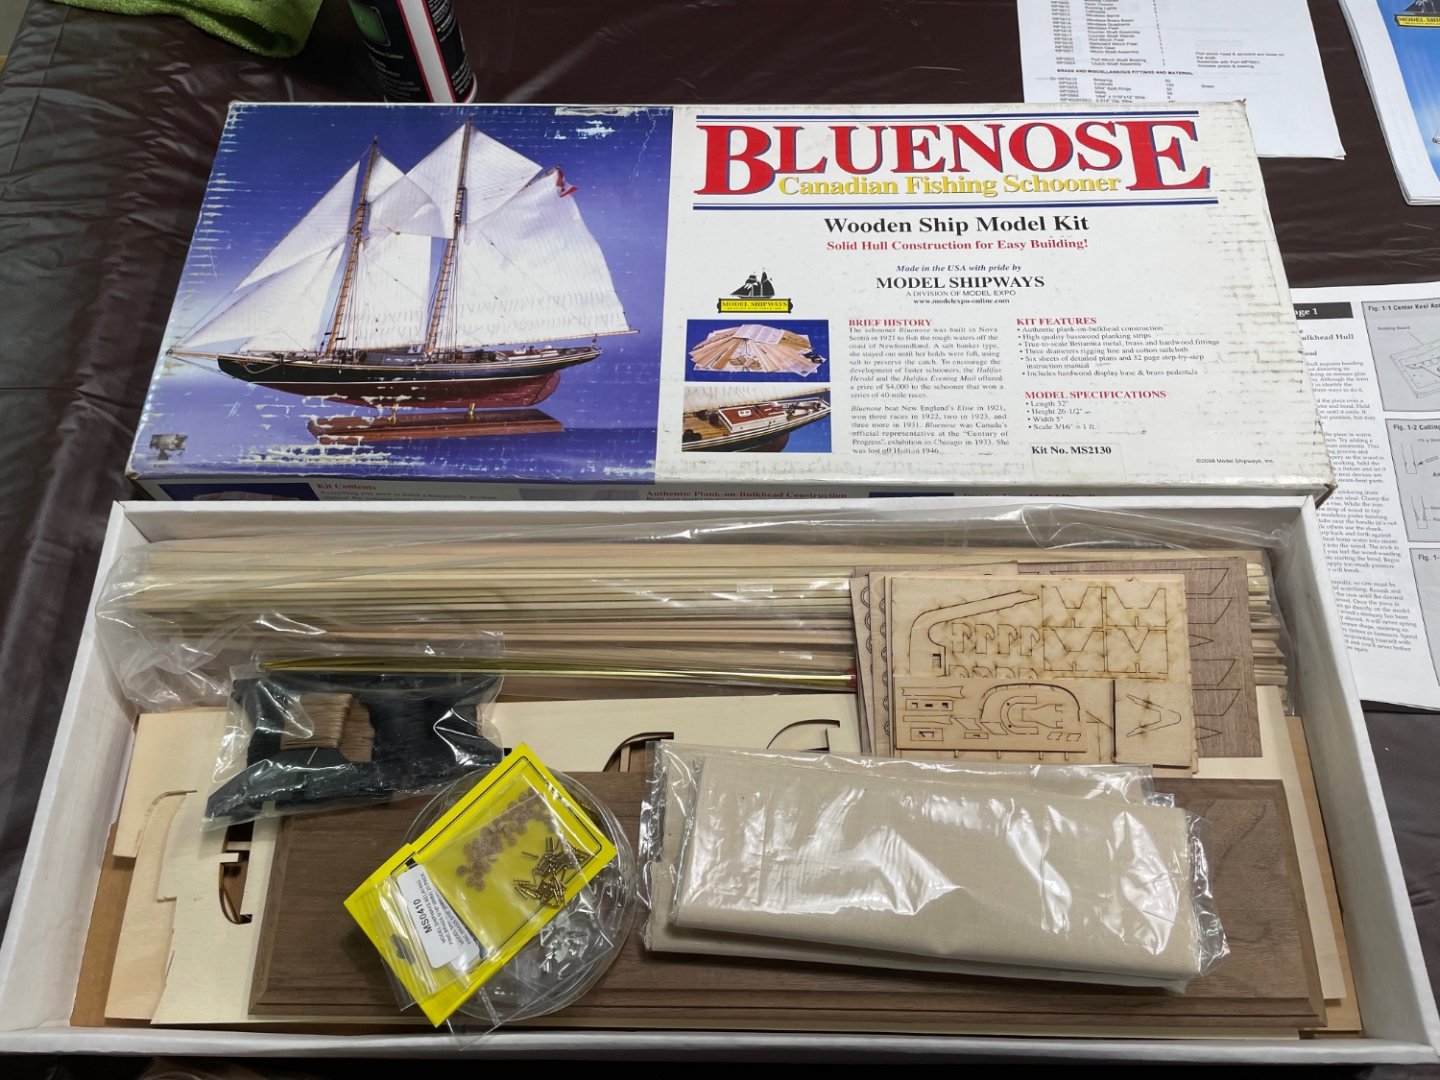 Bluenose by John Ruy - Model Shipways Kit No. MS2130 - 1/64 scale -  Canadian Fishing Schooner - - Kit build logs for subjects built from 1901 -  Present Day - Model Ship World™